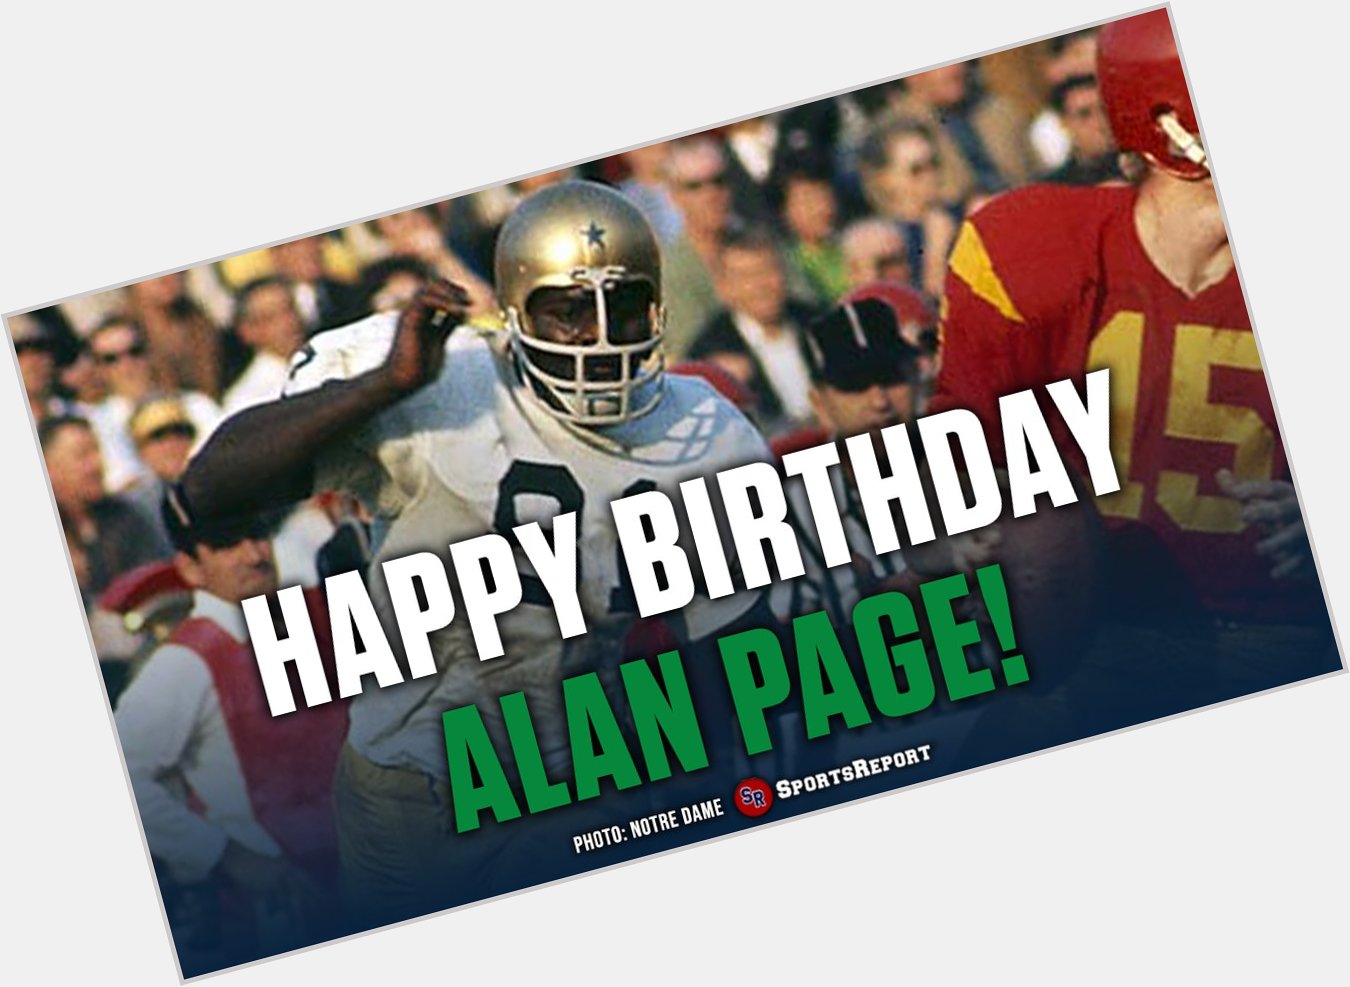  Fans, let\s wish legend Alan Page a Happy Birthday! 